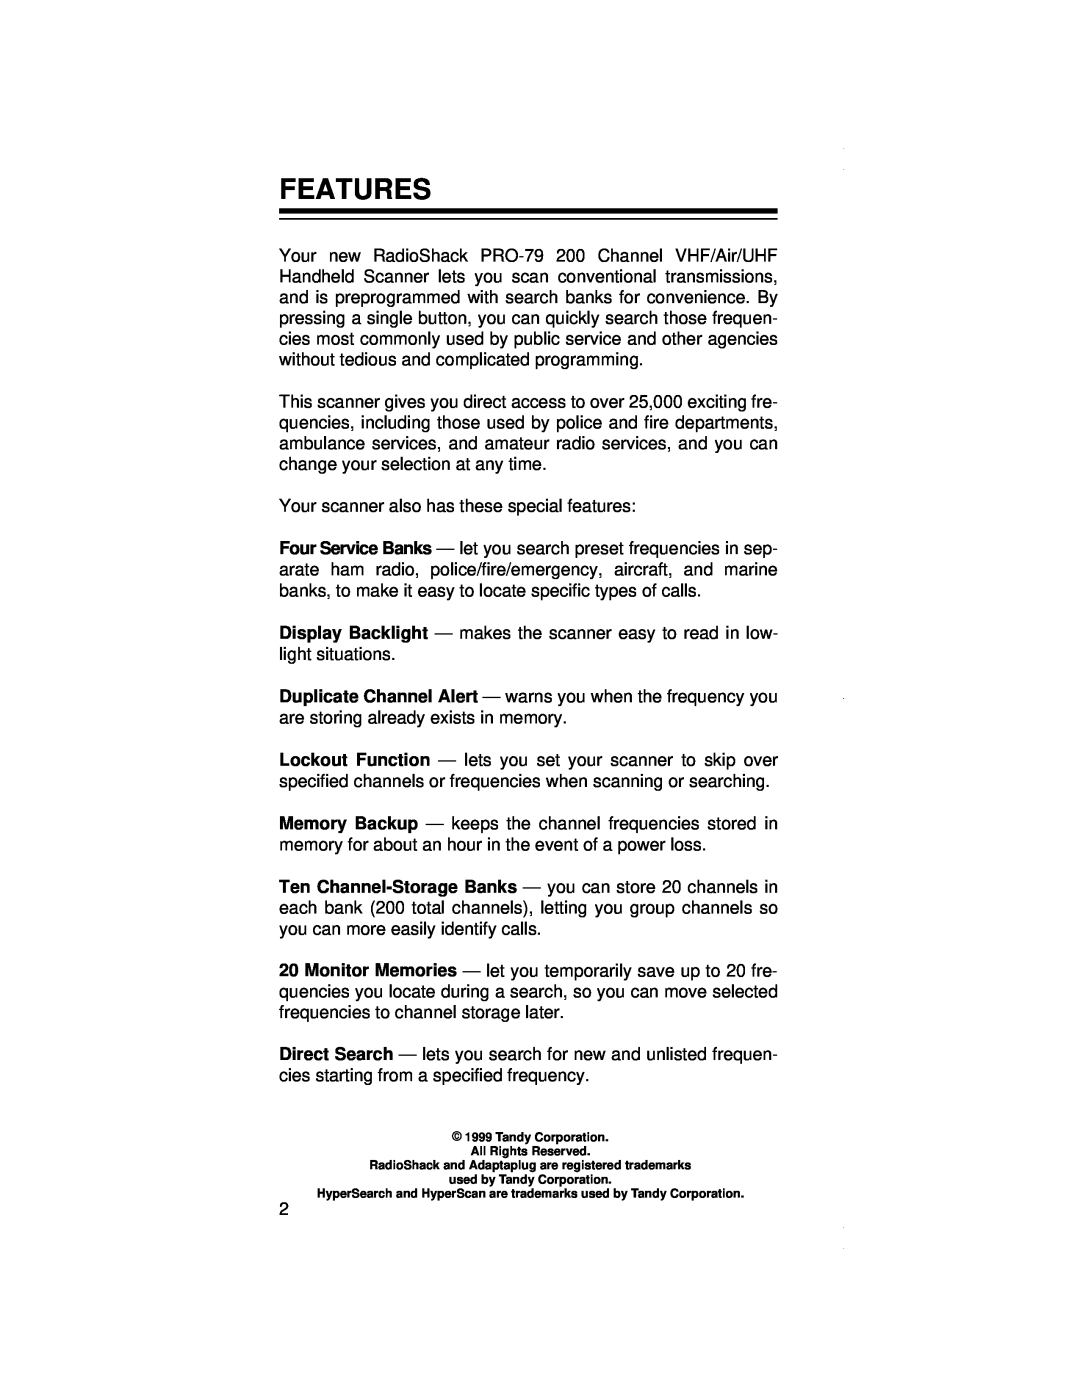 Radio Shack PRO-79 owner manual Features 